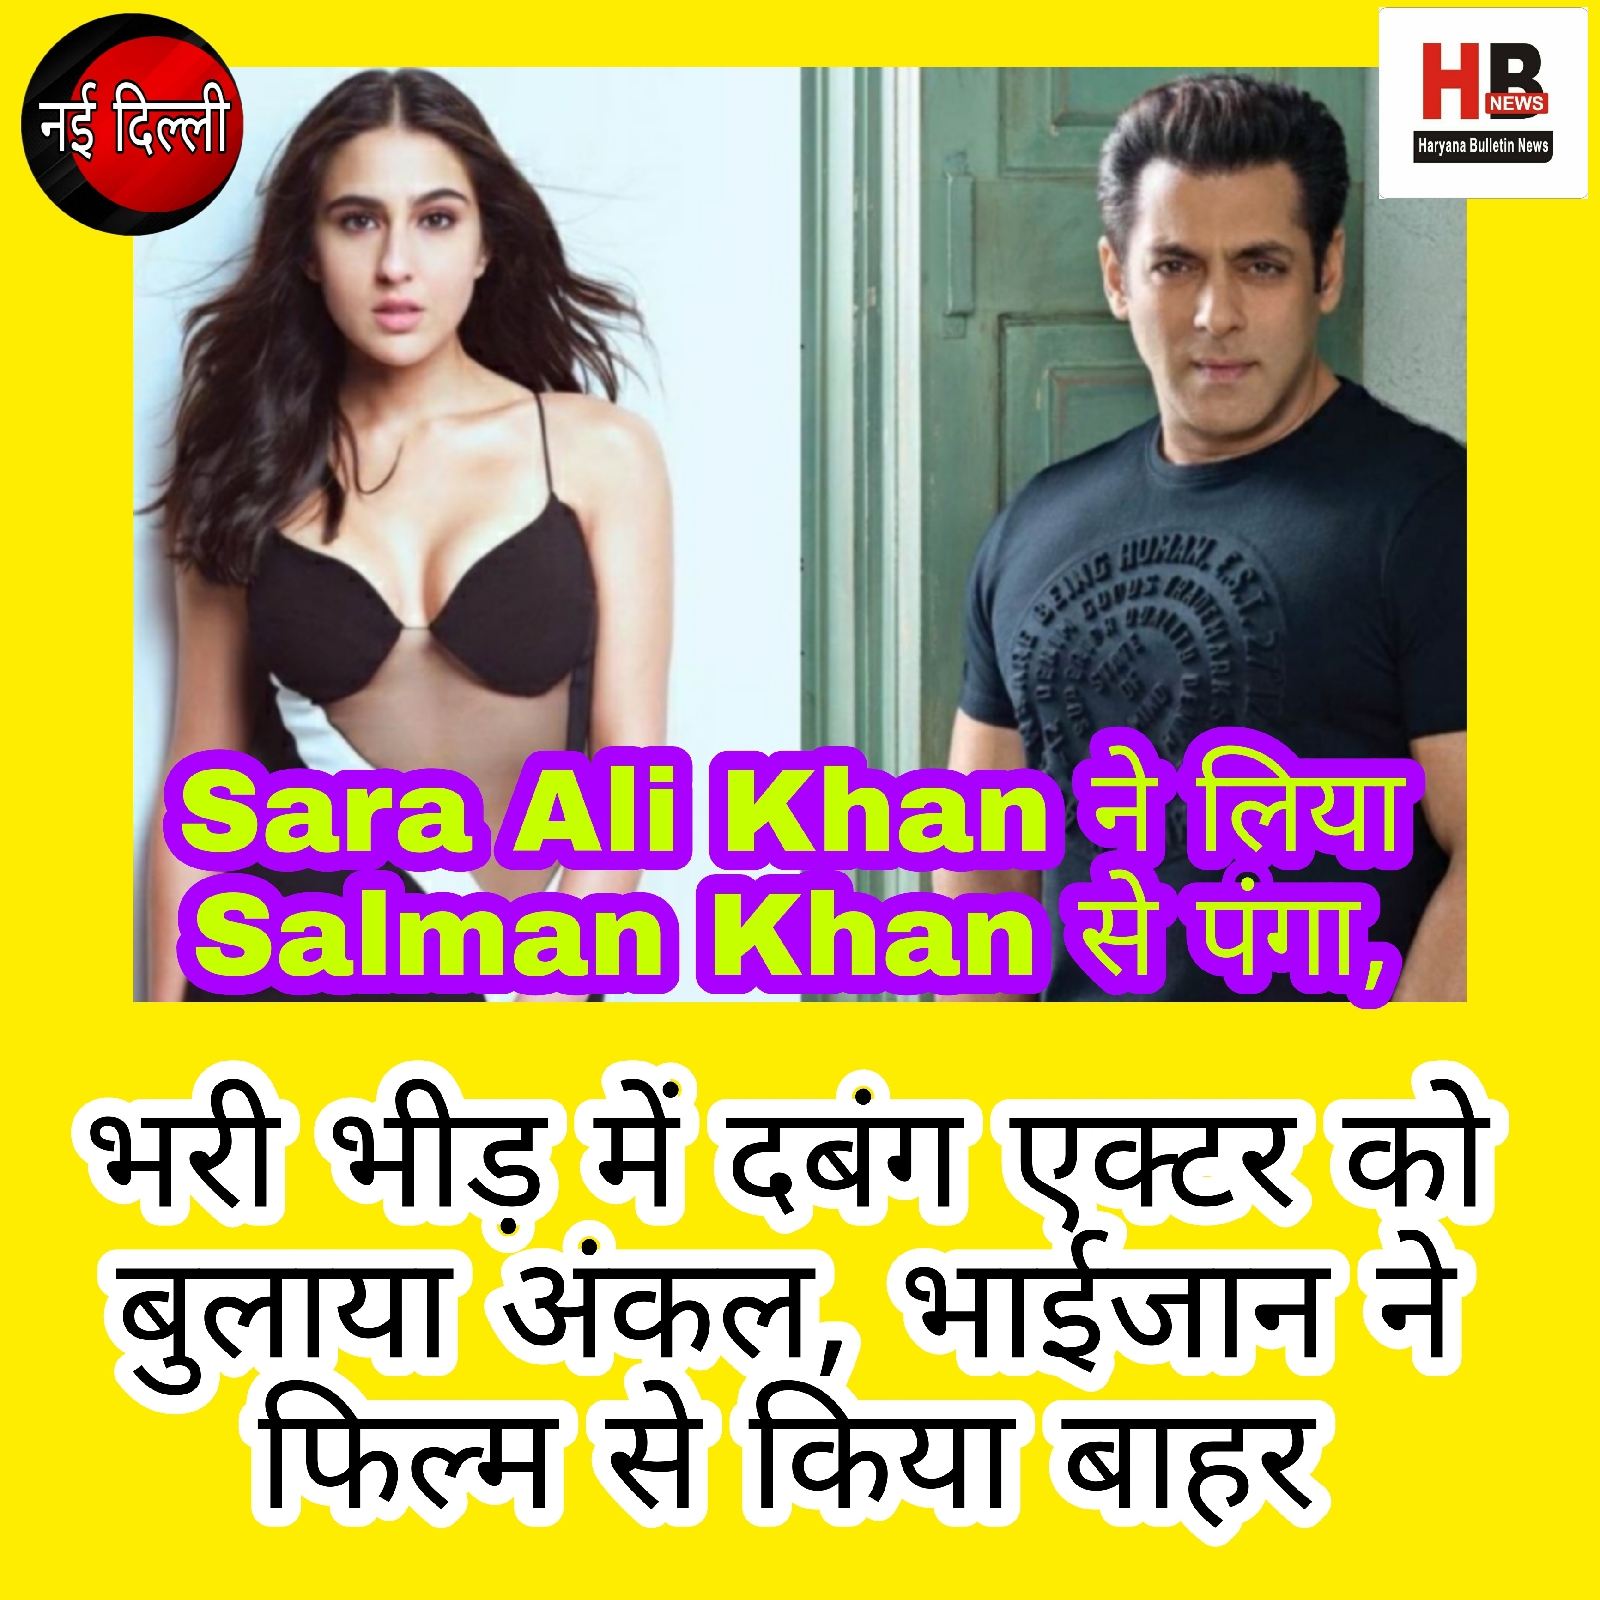 Sara Ali Khan messed up with Salman Khan, uncle called Dabangg actor in a crowded crowd, Bhaijaan kicked out of the film Haryana Bulletin News